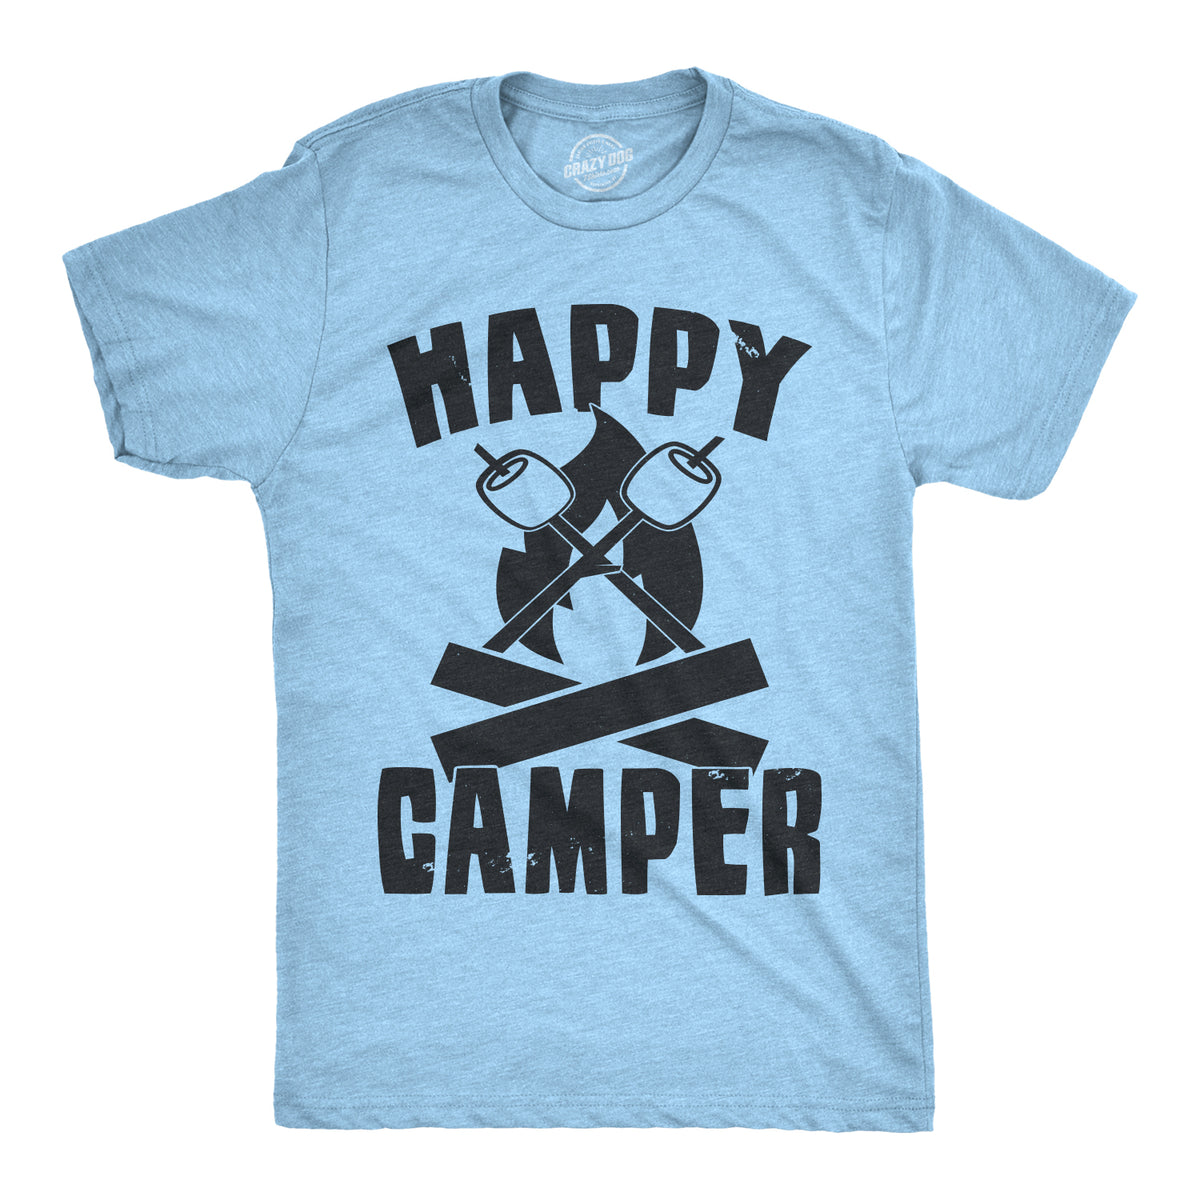 Funny Heather Light Blue - Happy Camper Happy Camper Mens T Shirt Nerdy Camping Retro Tee